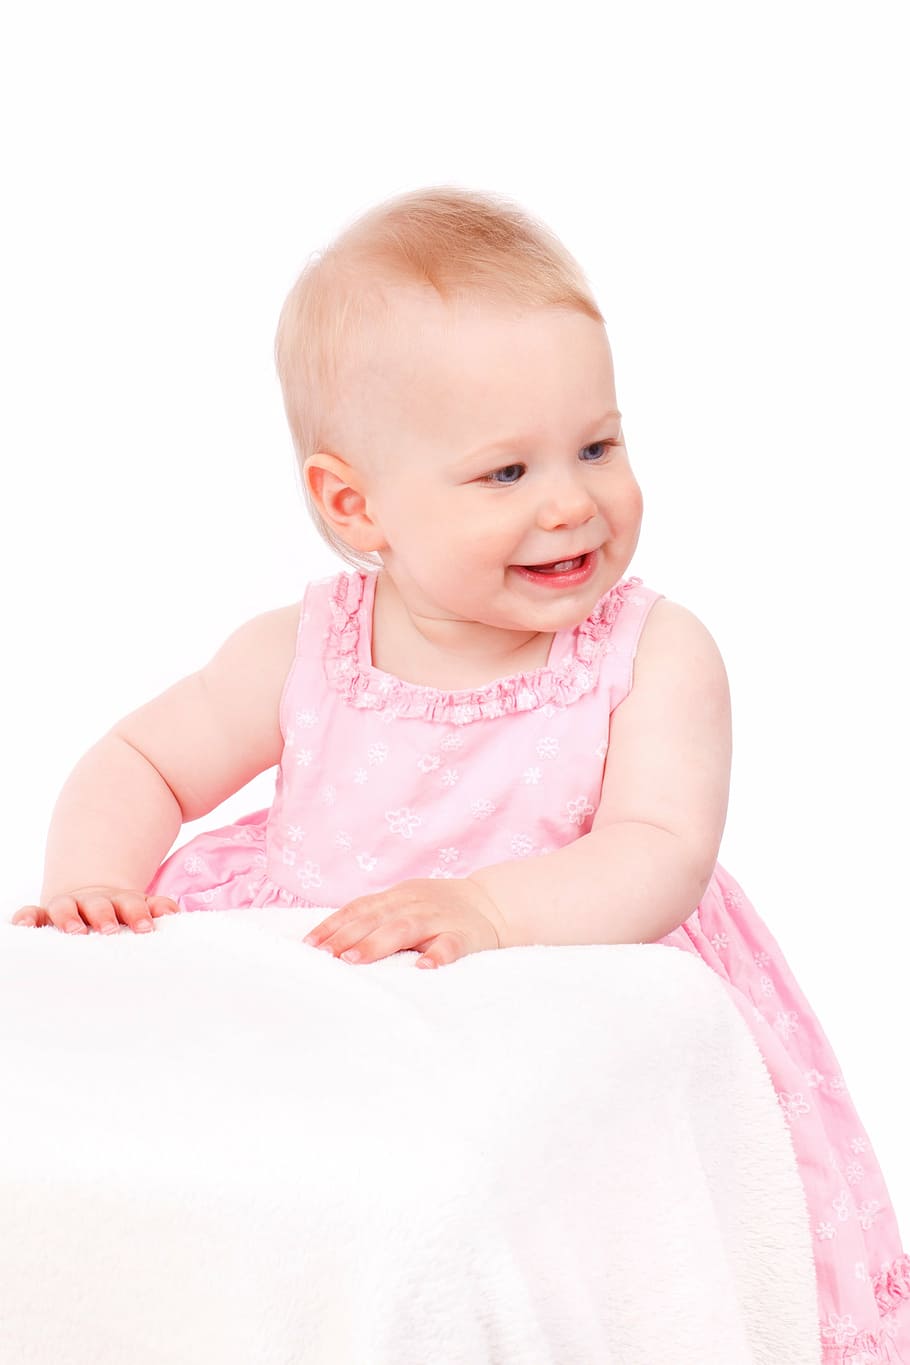 baby's pink dress, baby, caucasian, child, cute, expression, face, funny, girl, happy